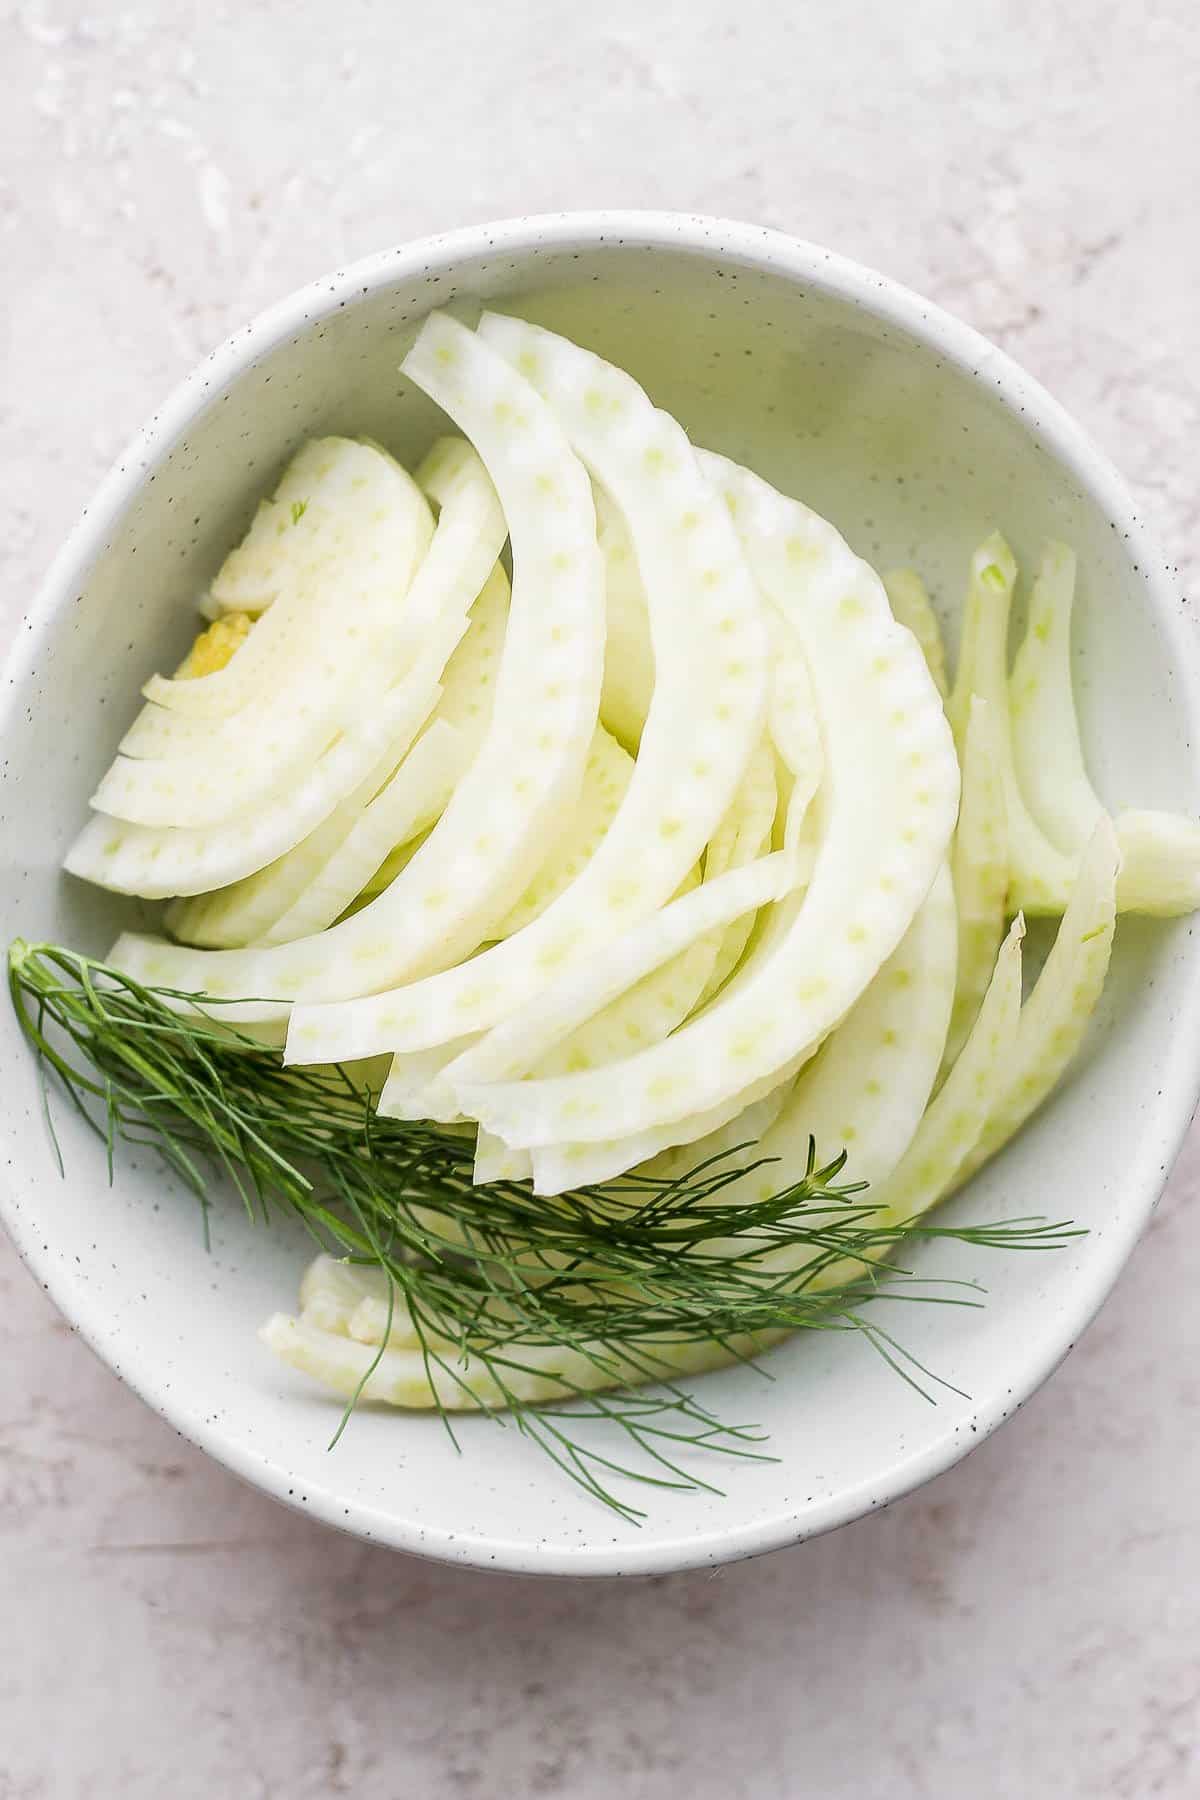 Sliced fennel in a bowl with fronds included